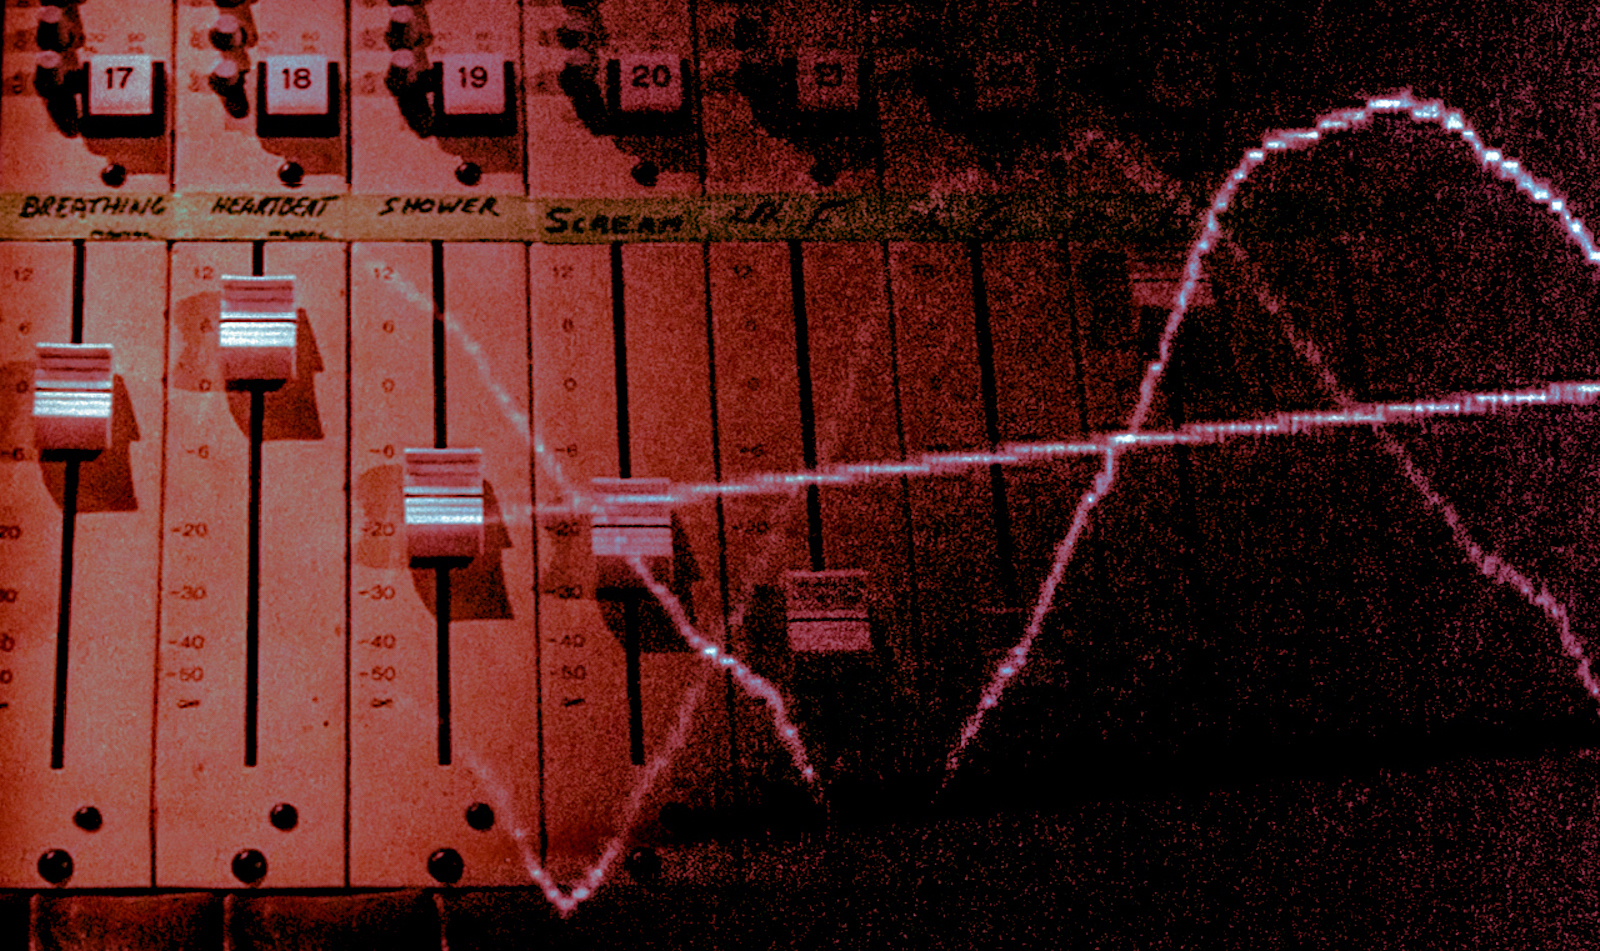 Red sound waves emit frequencies against an electronic sound board